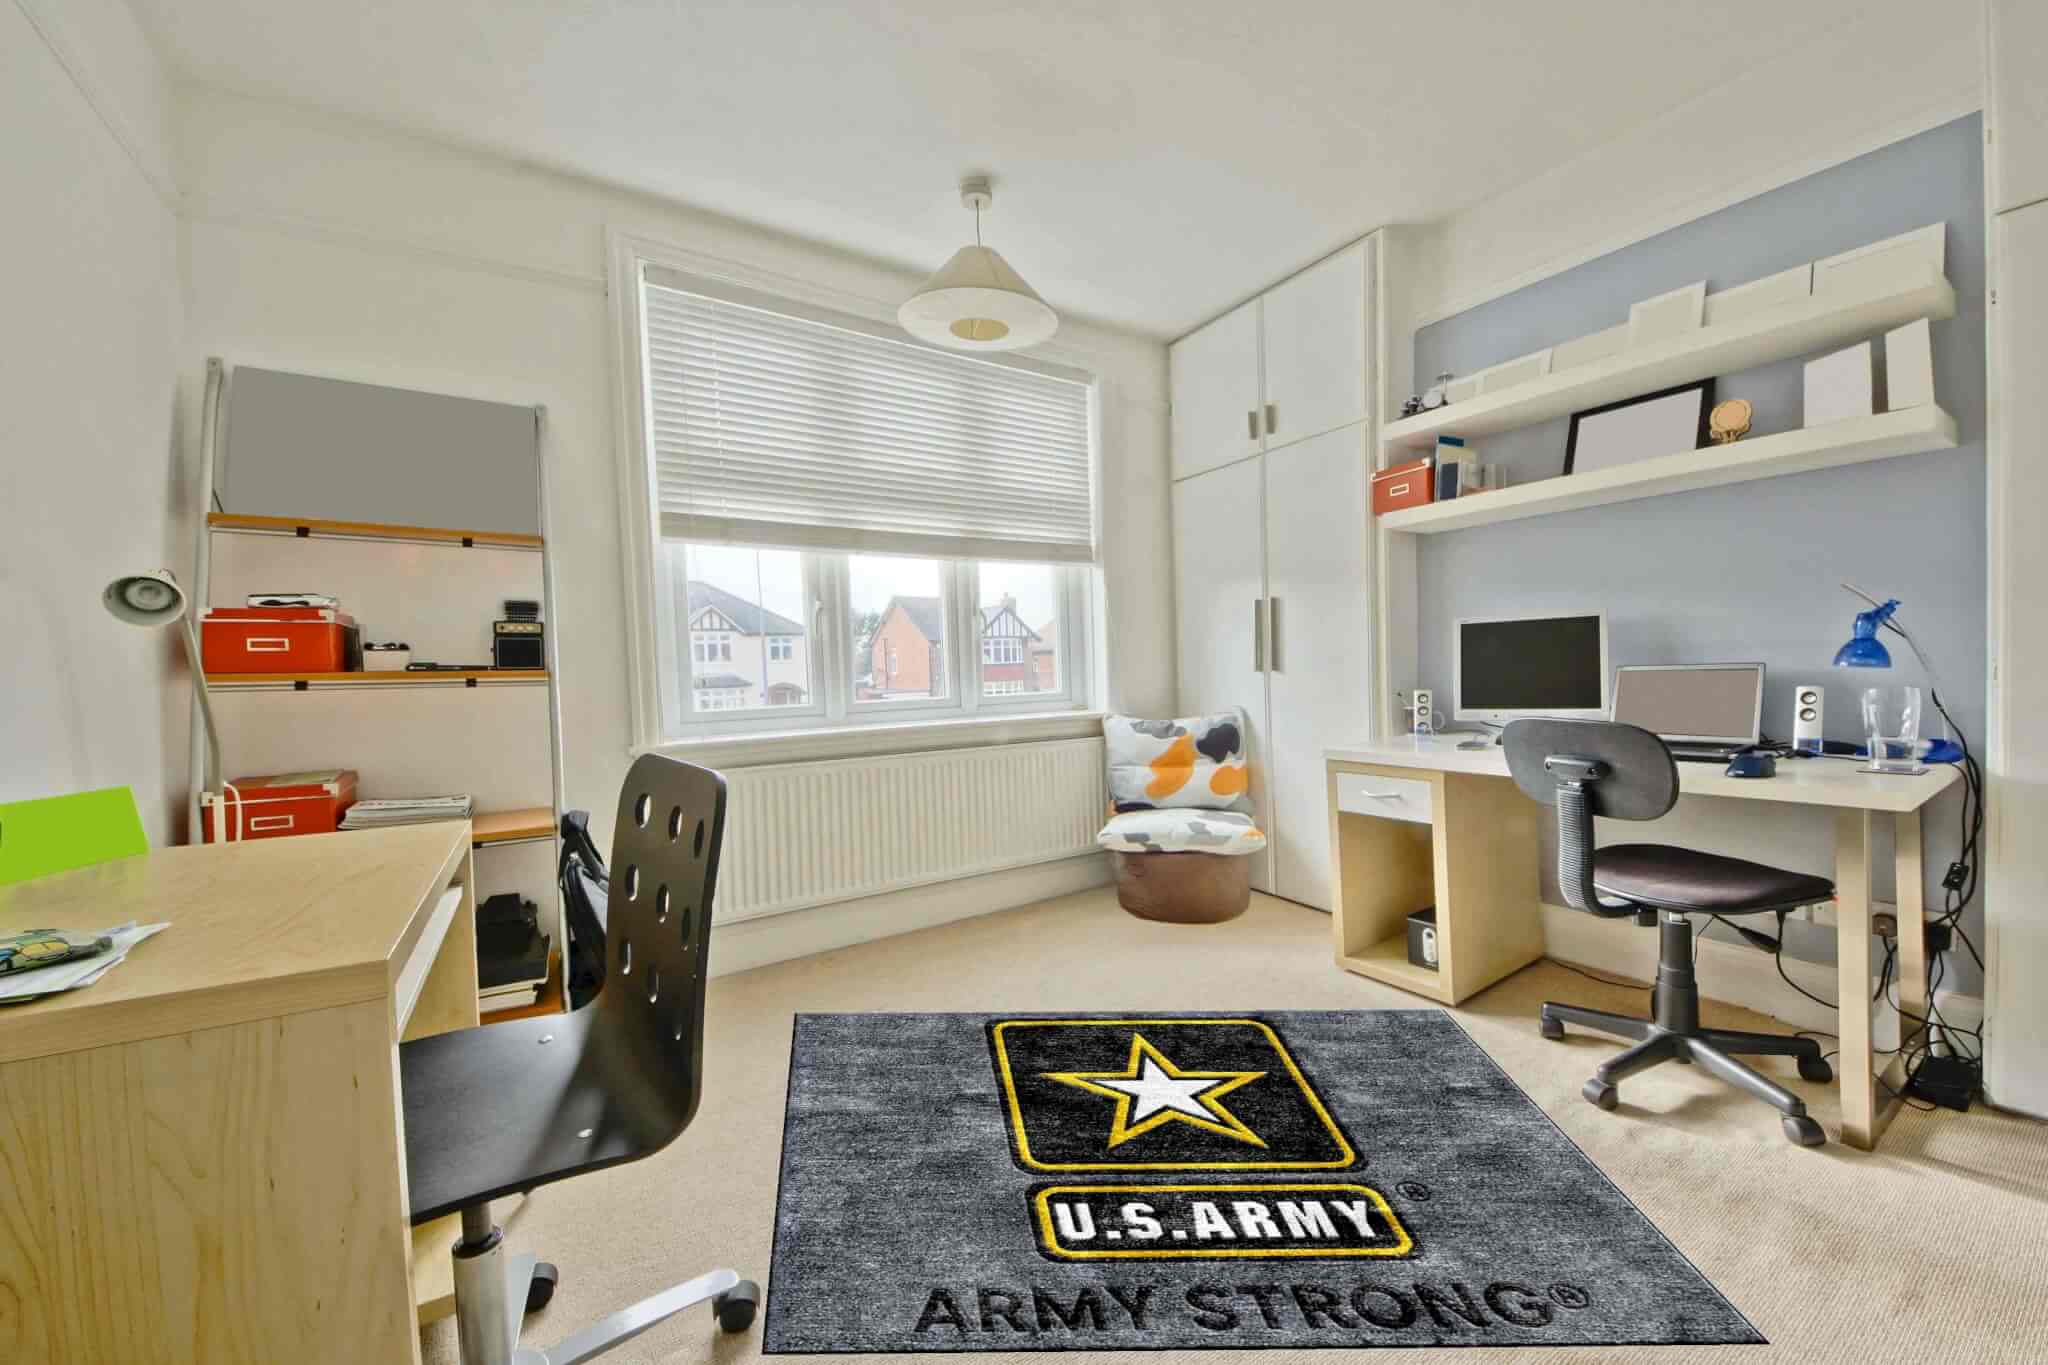 Top 8 Best Rugs for Military Offices or Barracks